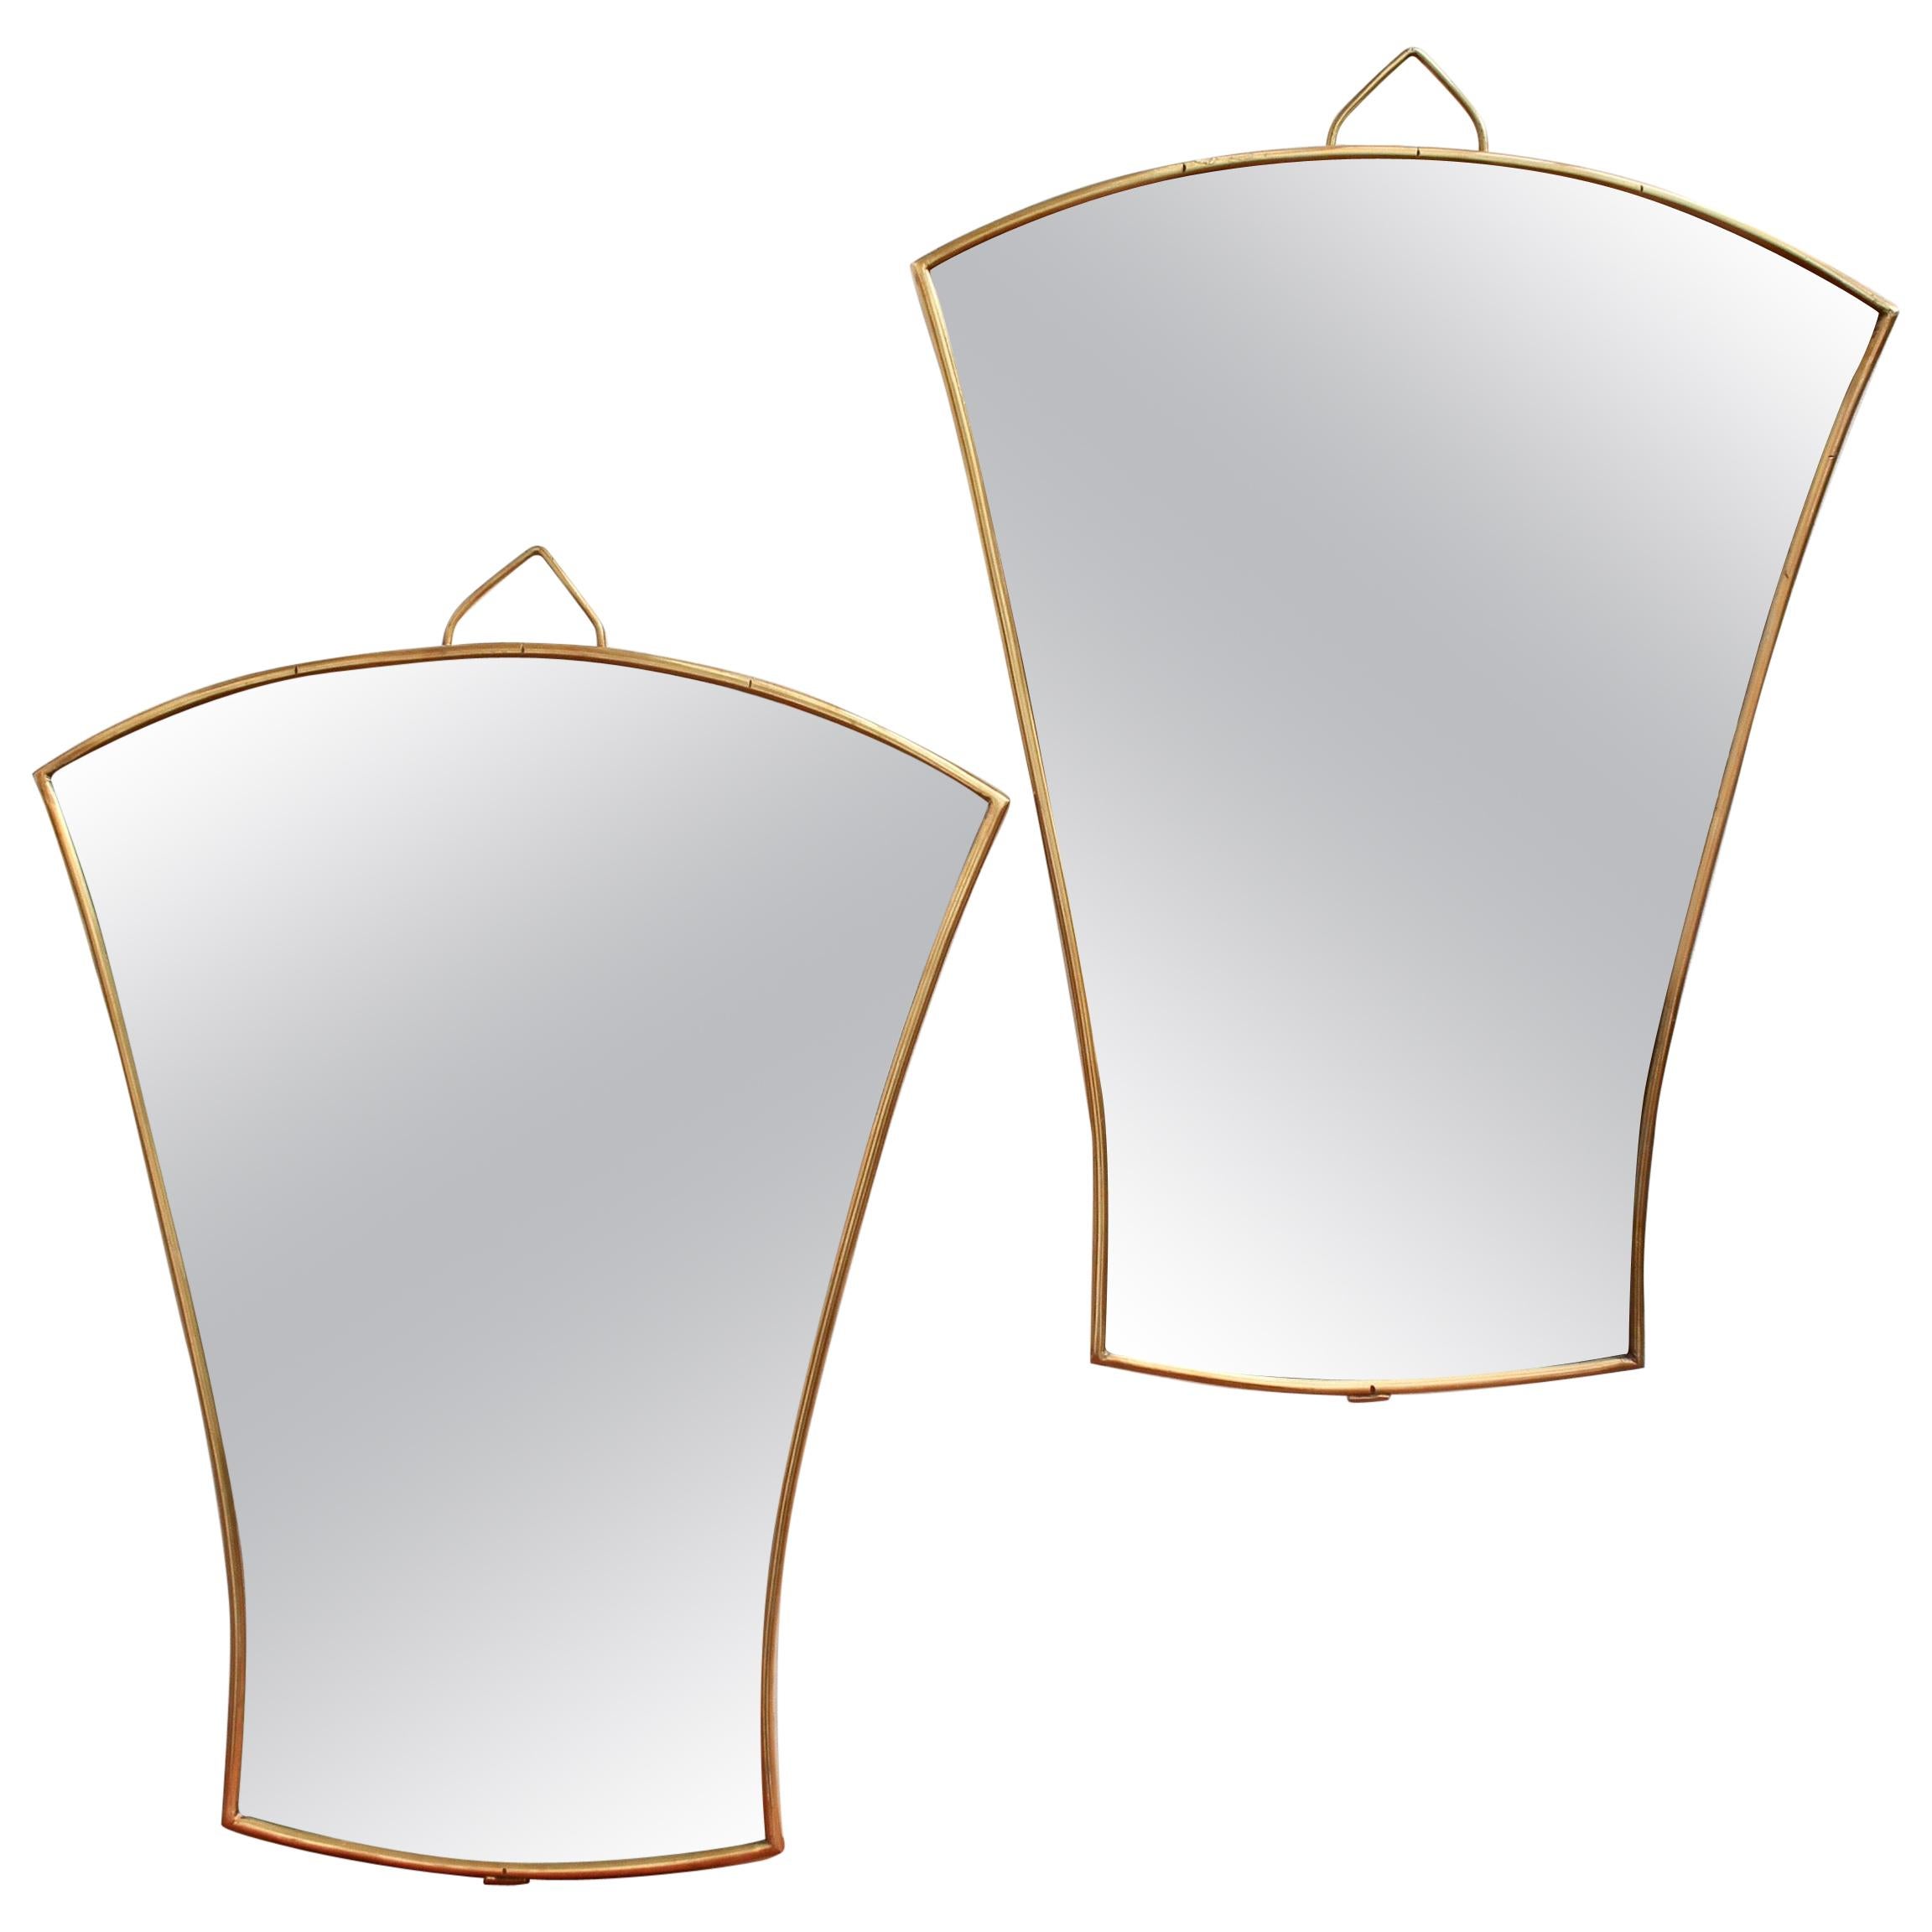 Pair of Italian Fan-Shaped Wall Mirrors with Brass Frames, Small 'circa 1950s'